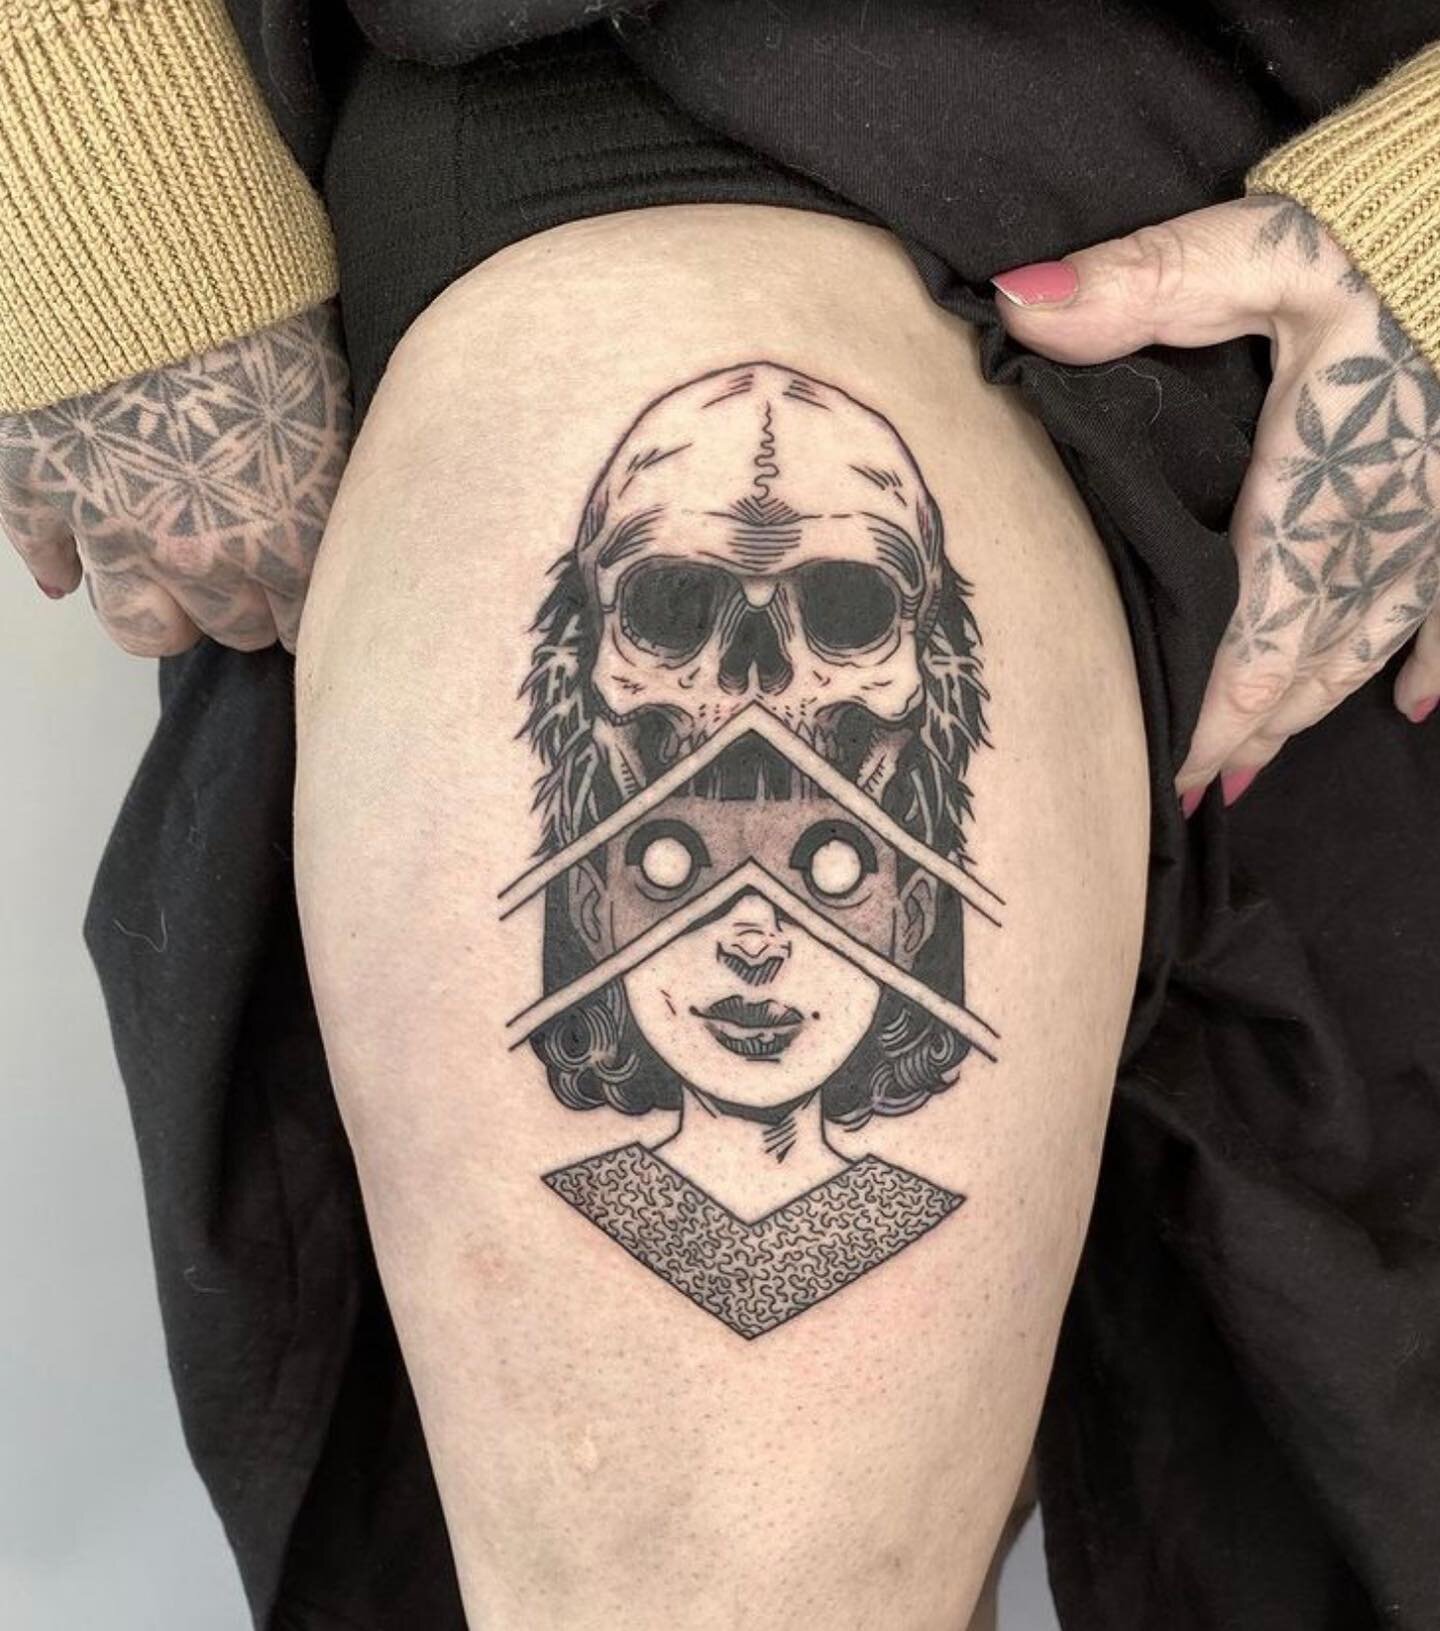 Thigh tattoo by resident artist @oddhouse 💀📐
Spaces in April. Email Alex directly to book 
-
-
#scifitattoo#blackandgreyink#tattooideas#tattoostyle#tattoolife#illustrationtattoo#btattooing#tattooflash#londontattoos